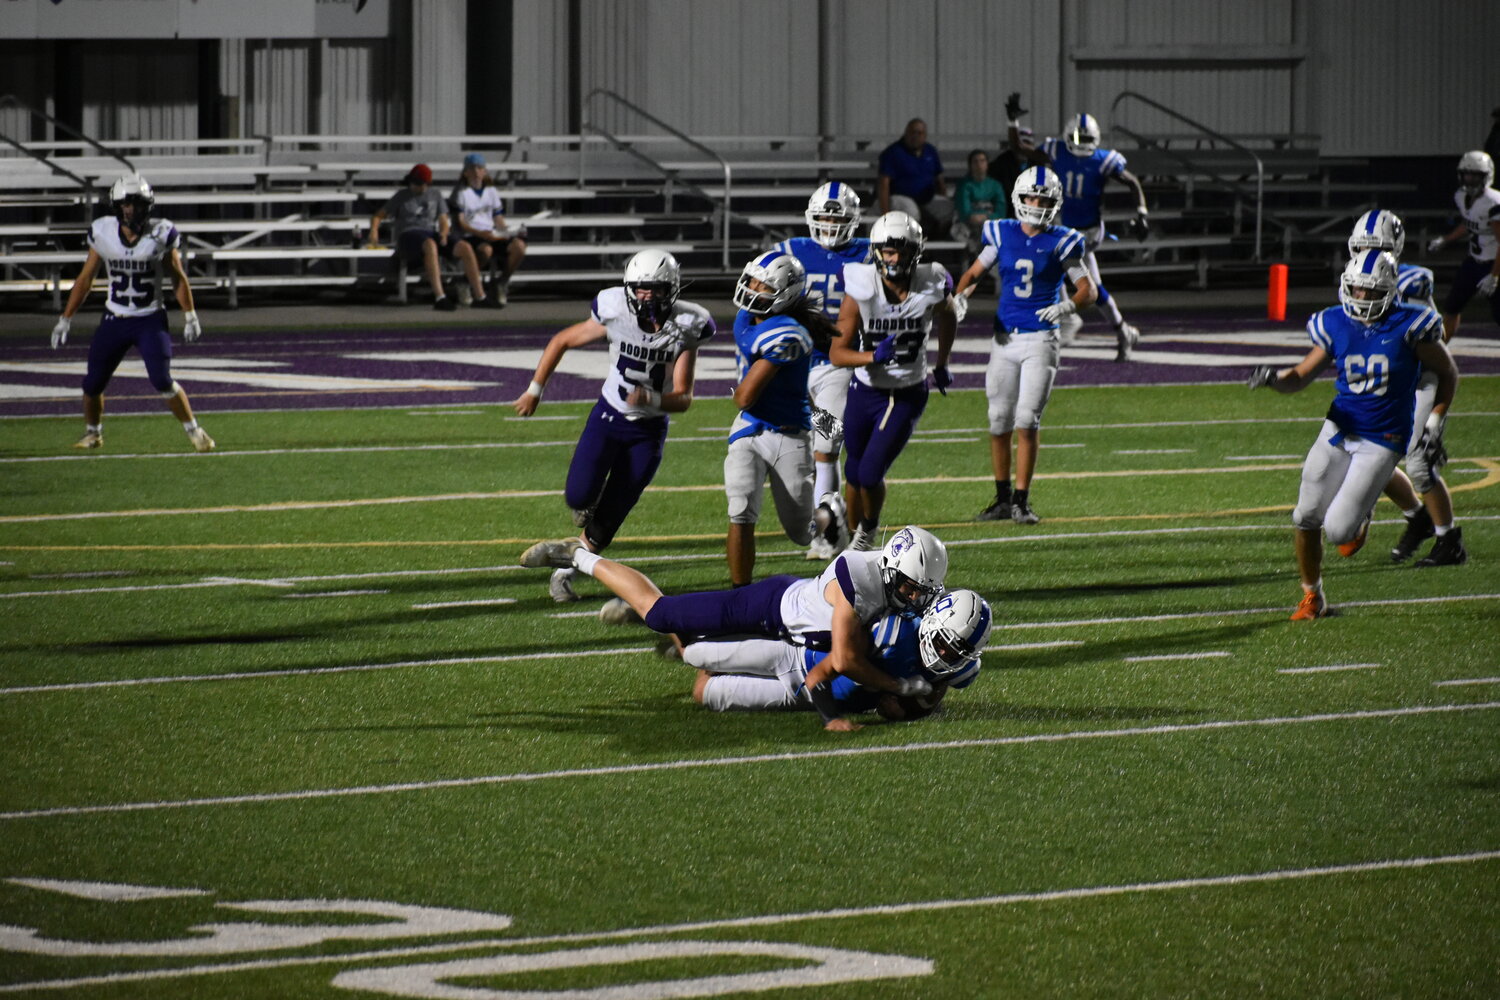 Henry Caswell with a sack